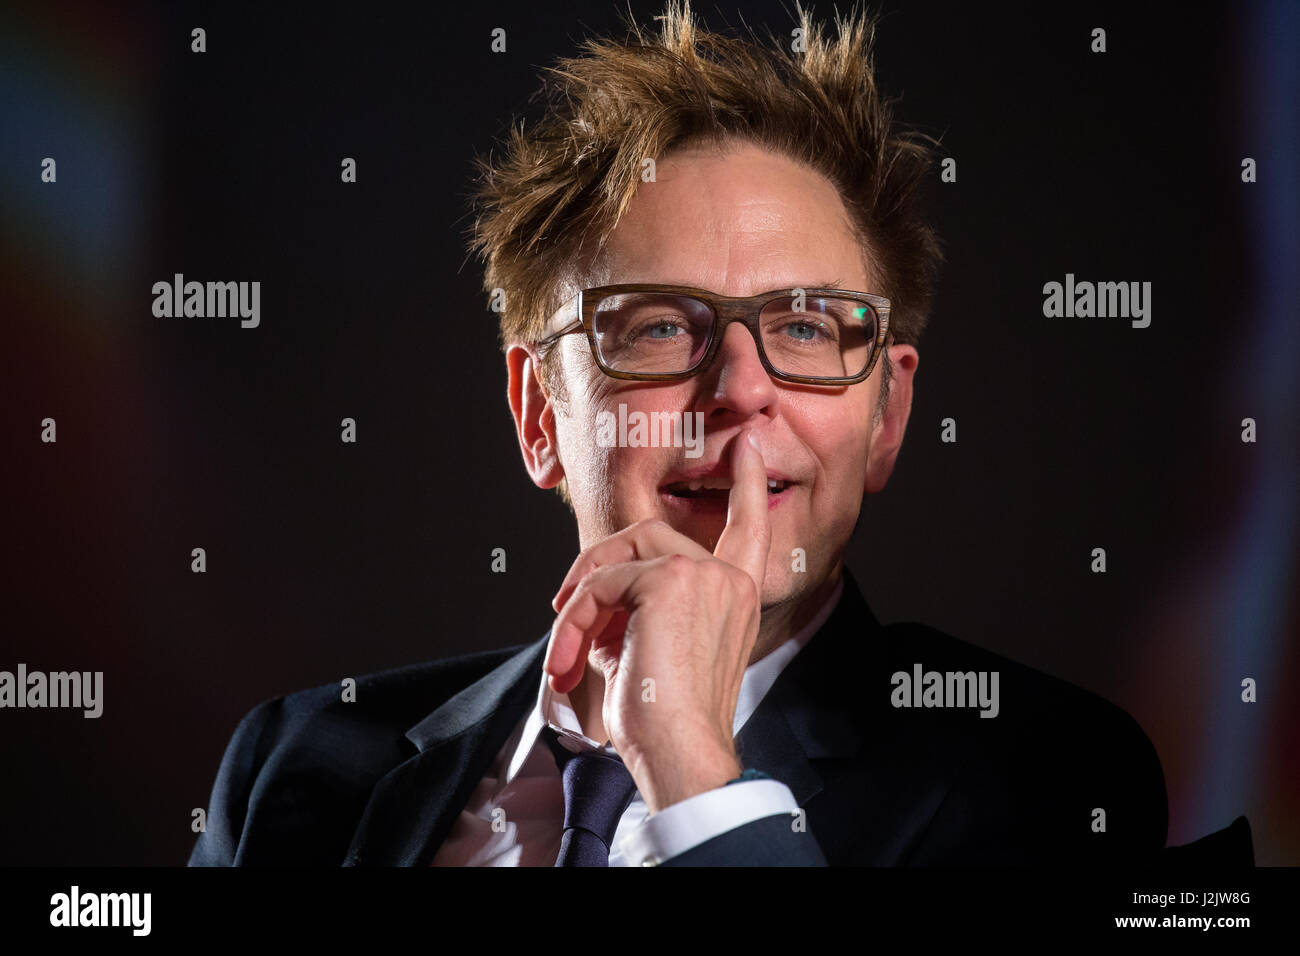 Moscow, Russia. 27th Apr, 2017. At the premiere 'Guardians of the Galaxy Vol. 2' film at the KARO 11 Oktyabr Cinema at scene american film director James Gunn. Stock Photo